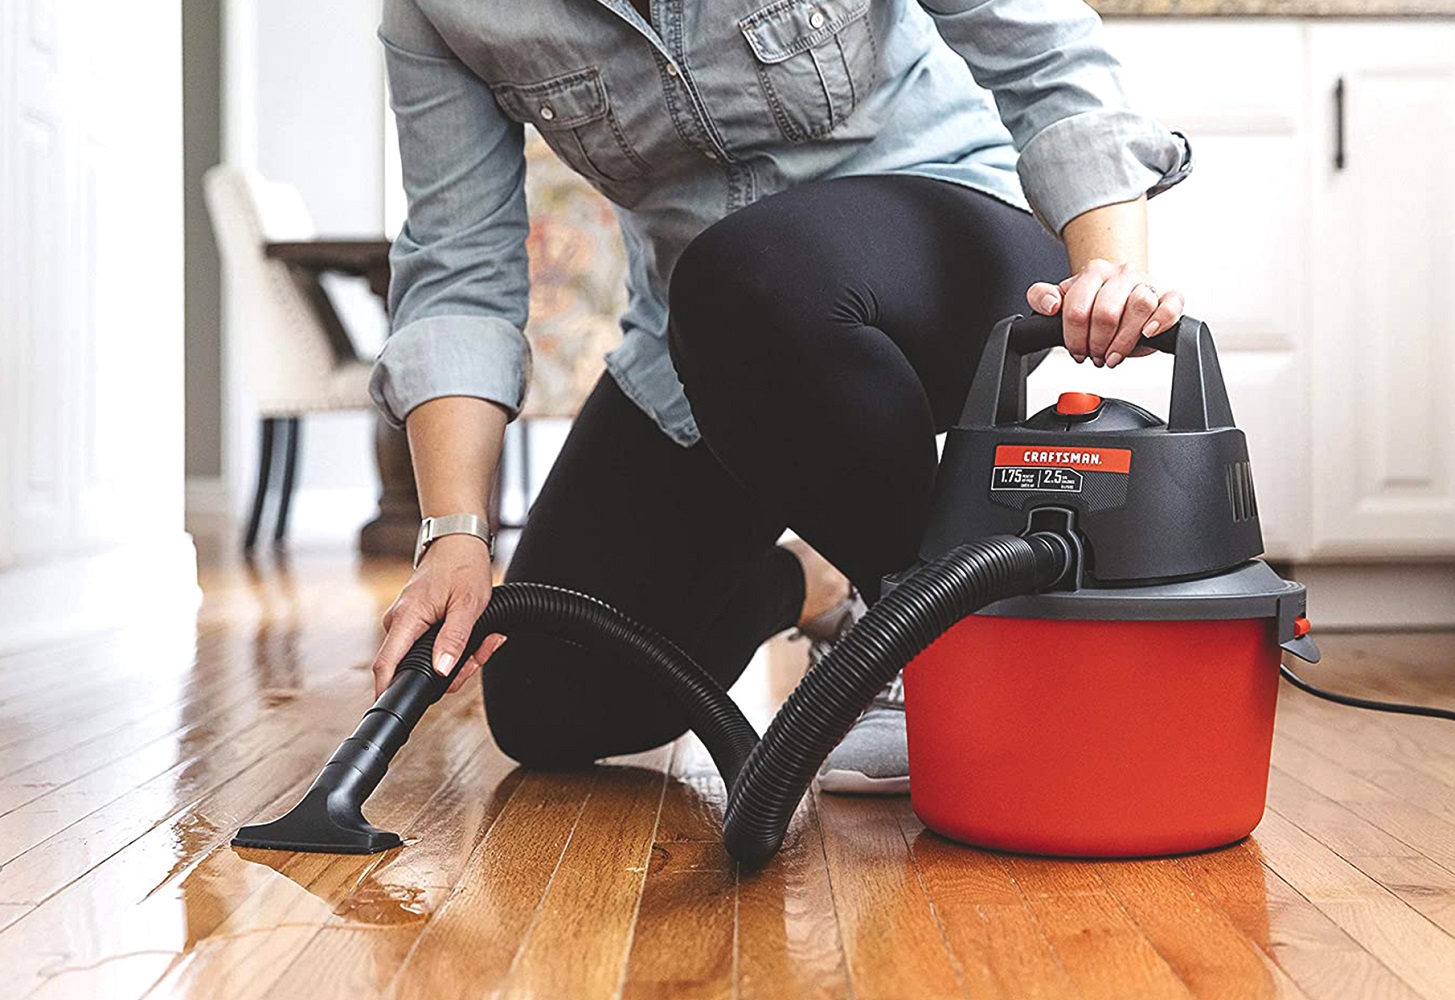 4 Best Wet/Dry Vacuums for September 2022 | Check Reviews